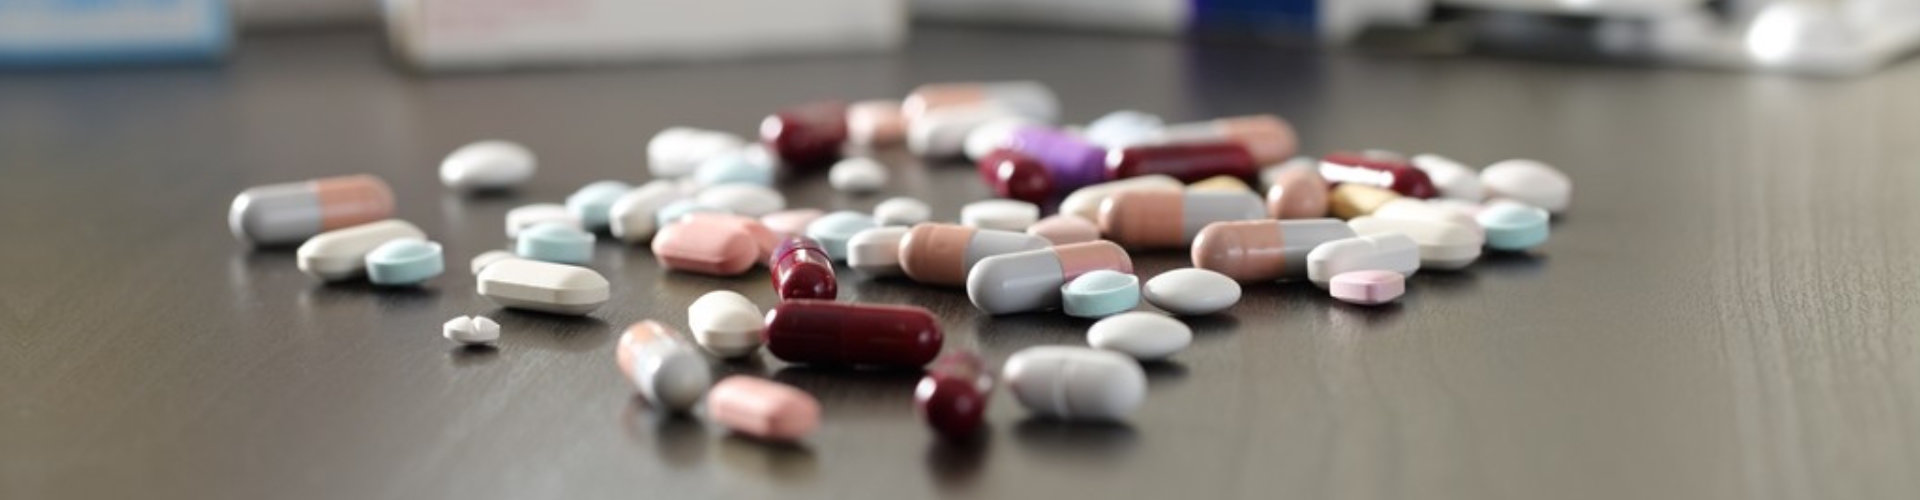 lot of pills and medicines on a black wooden table